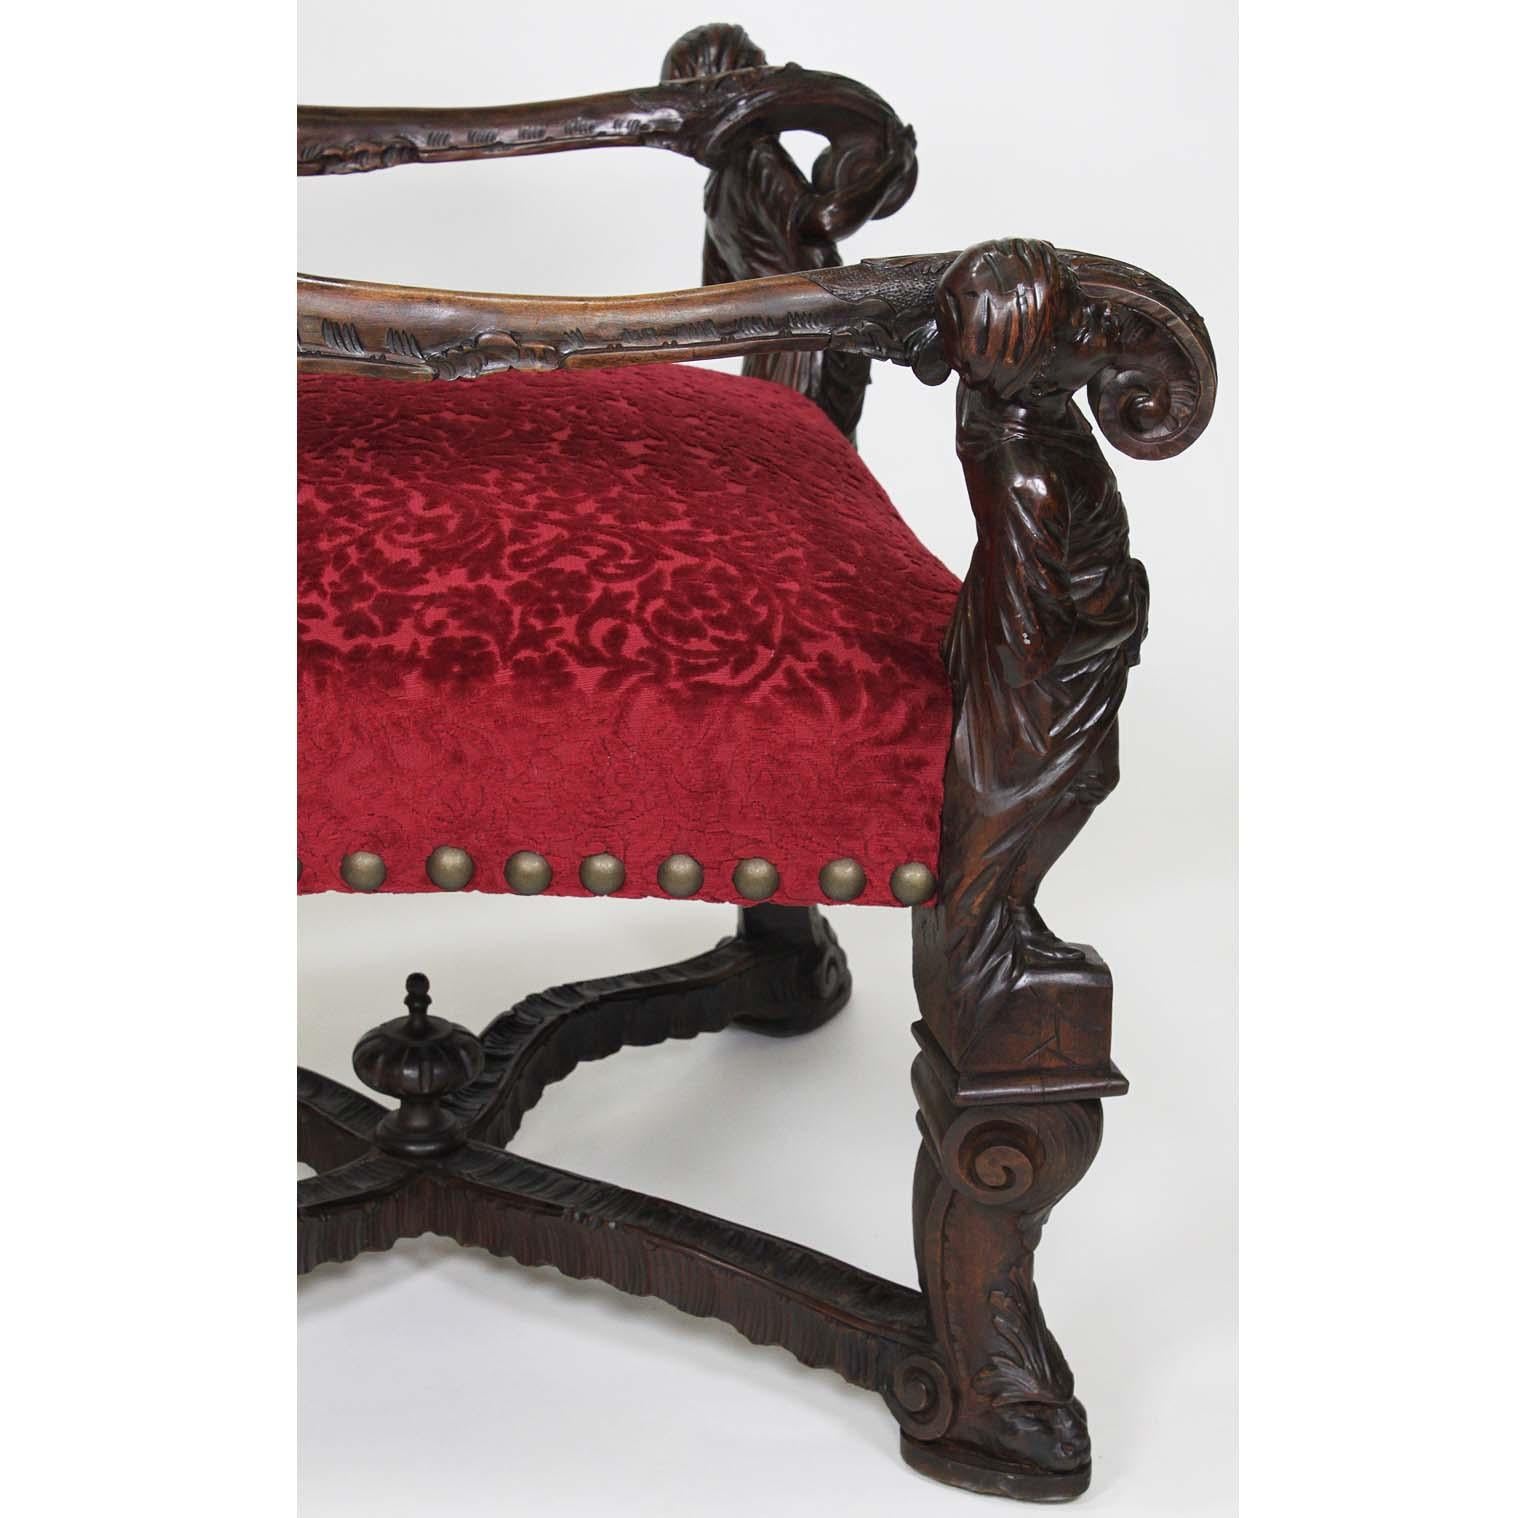 In Manner of Andrea Brustolon Venetian 19th Century Carved Walnut Figural Throne For Sale 7